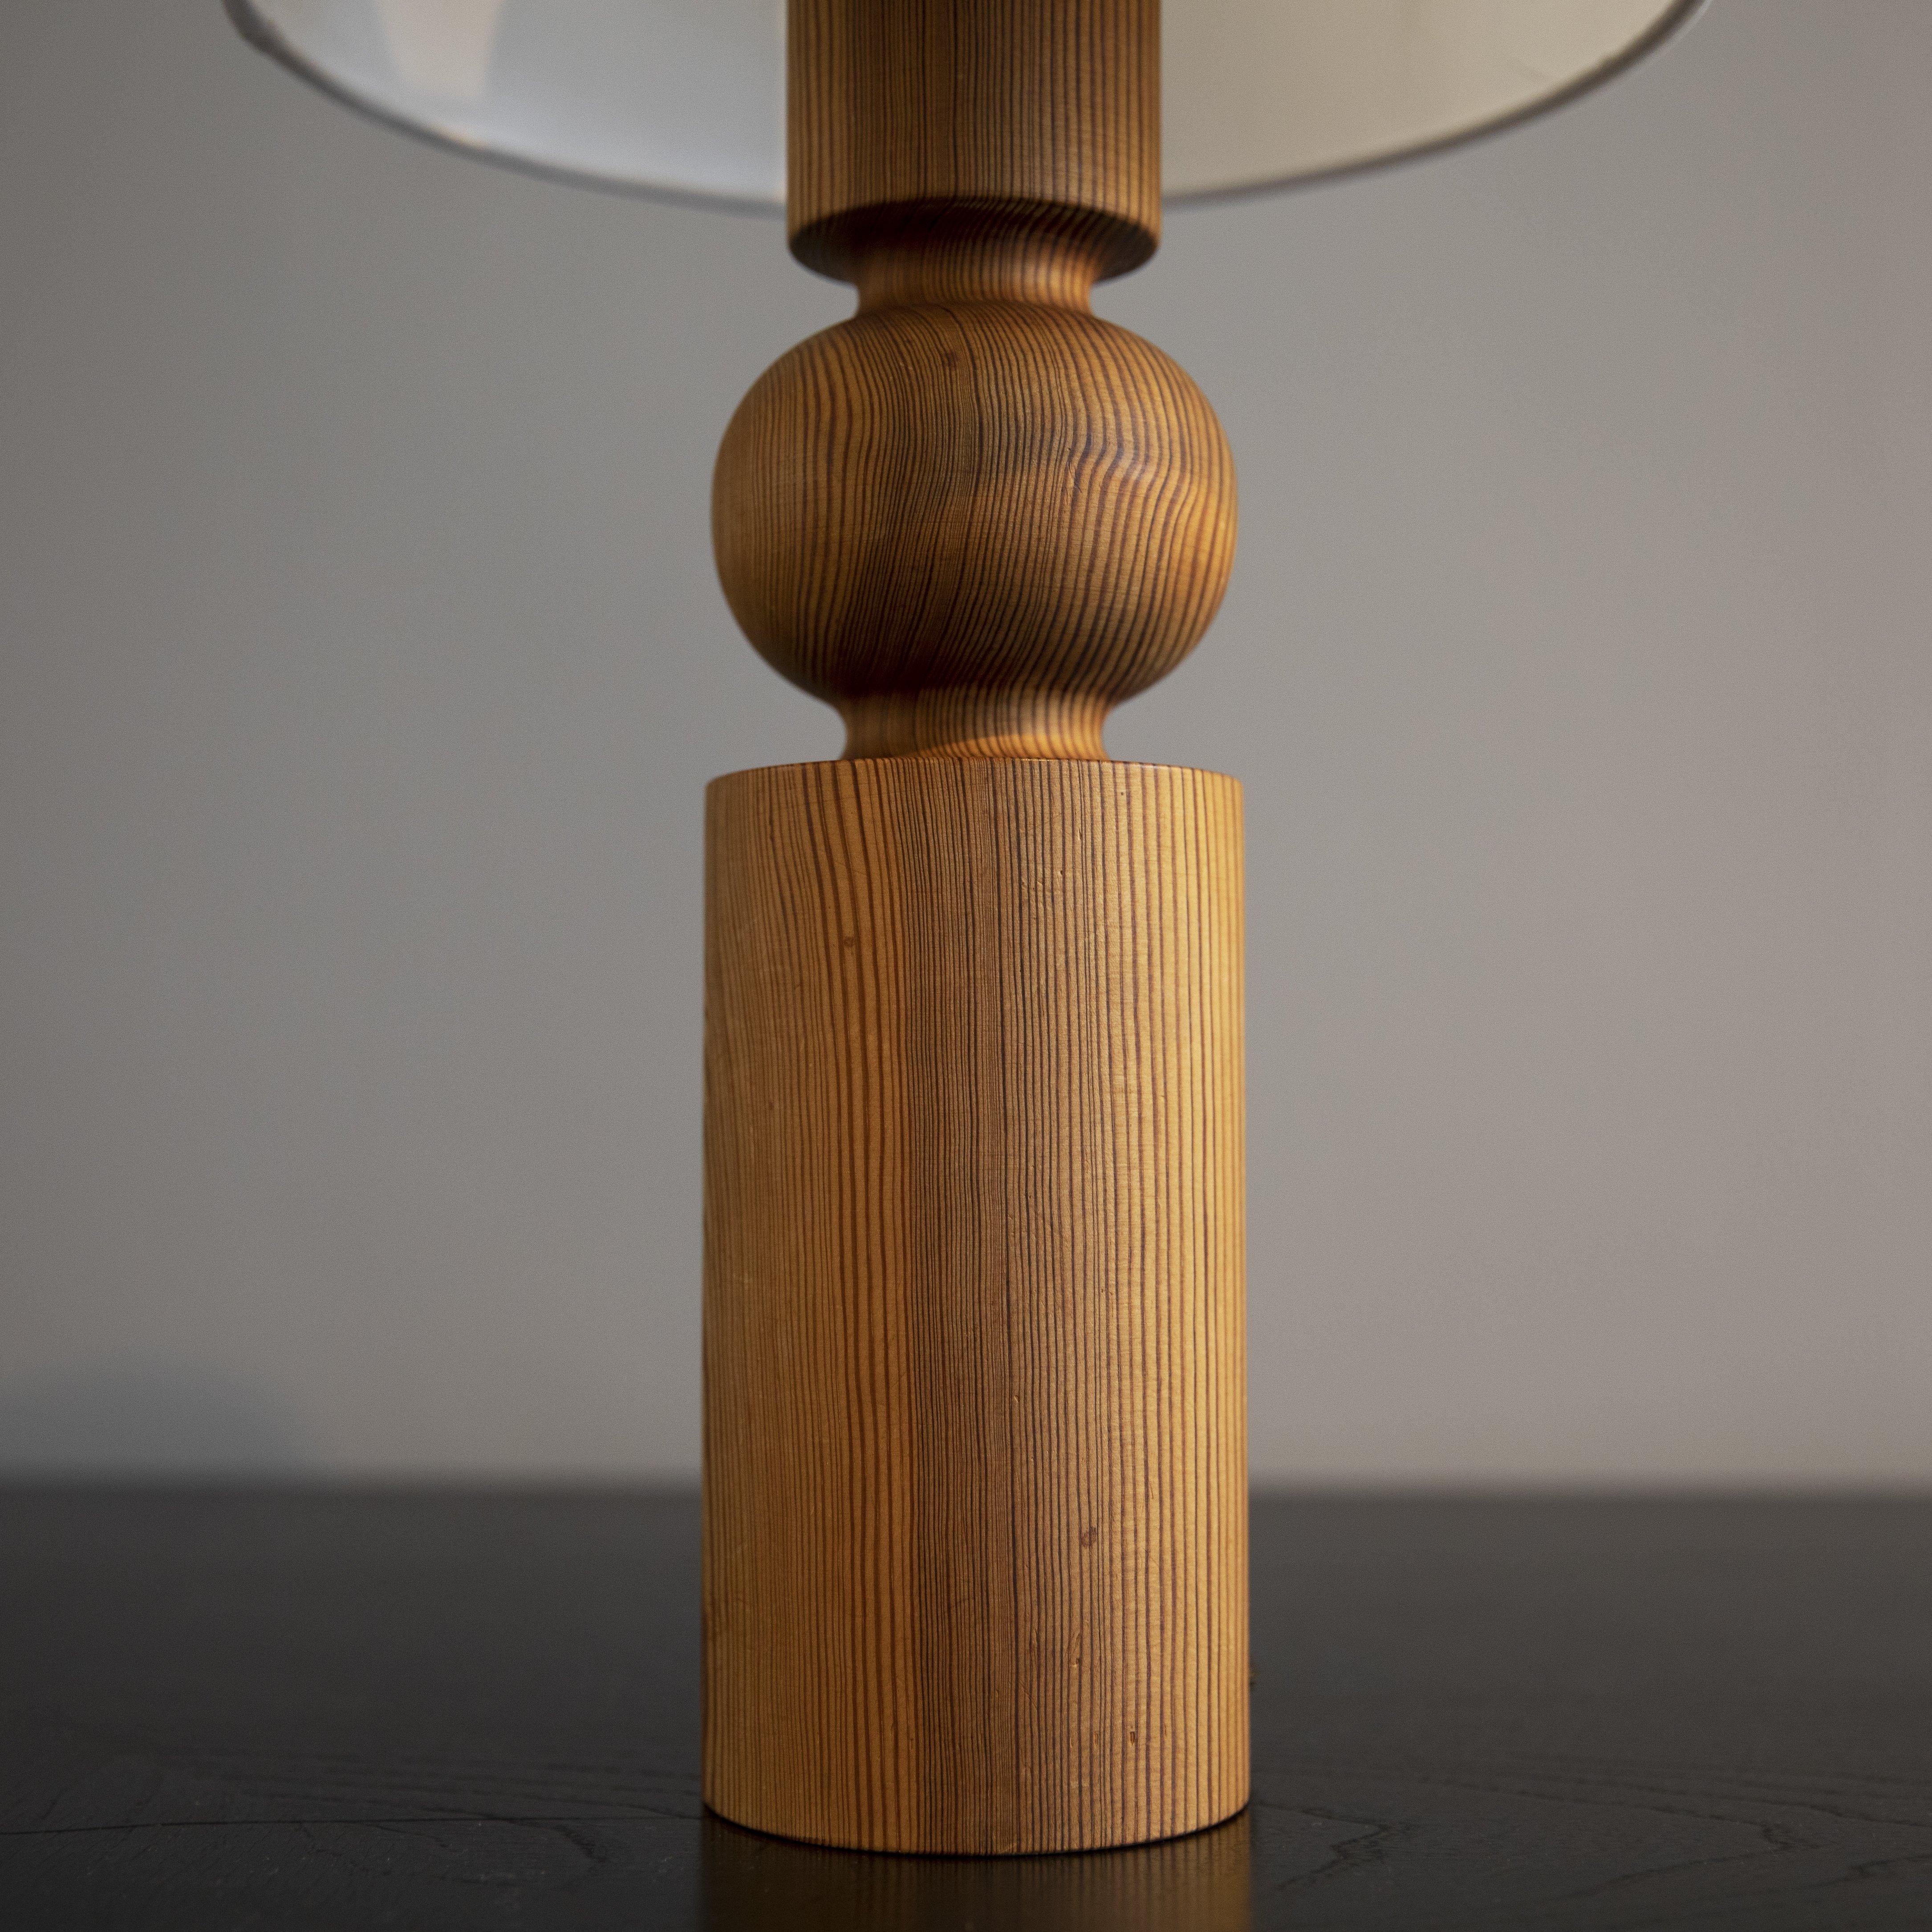 A statement table light designed by Swedish brothers Uno & Östen Kristiansson circa 1966 and made by Östen Kristiansson AB around the same date (formery Vittsjö Möbelfabrik and later known as Luxus).
The main body of the lamp is a sculptural solid